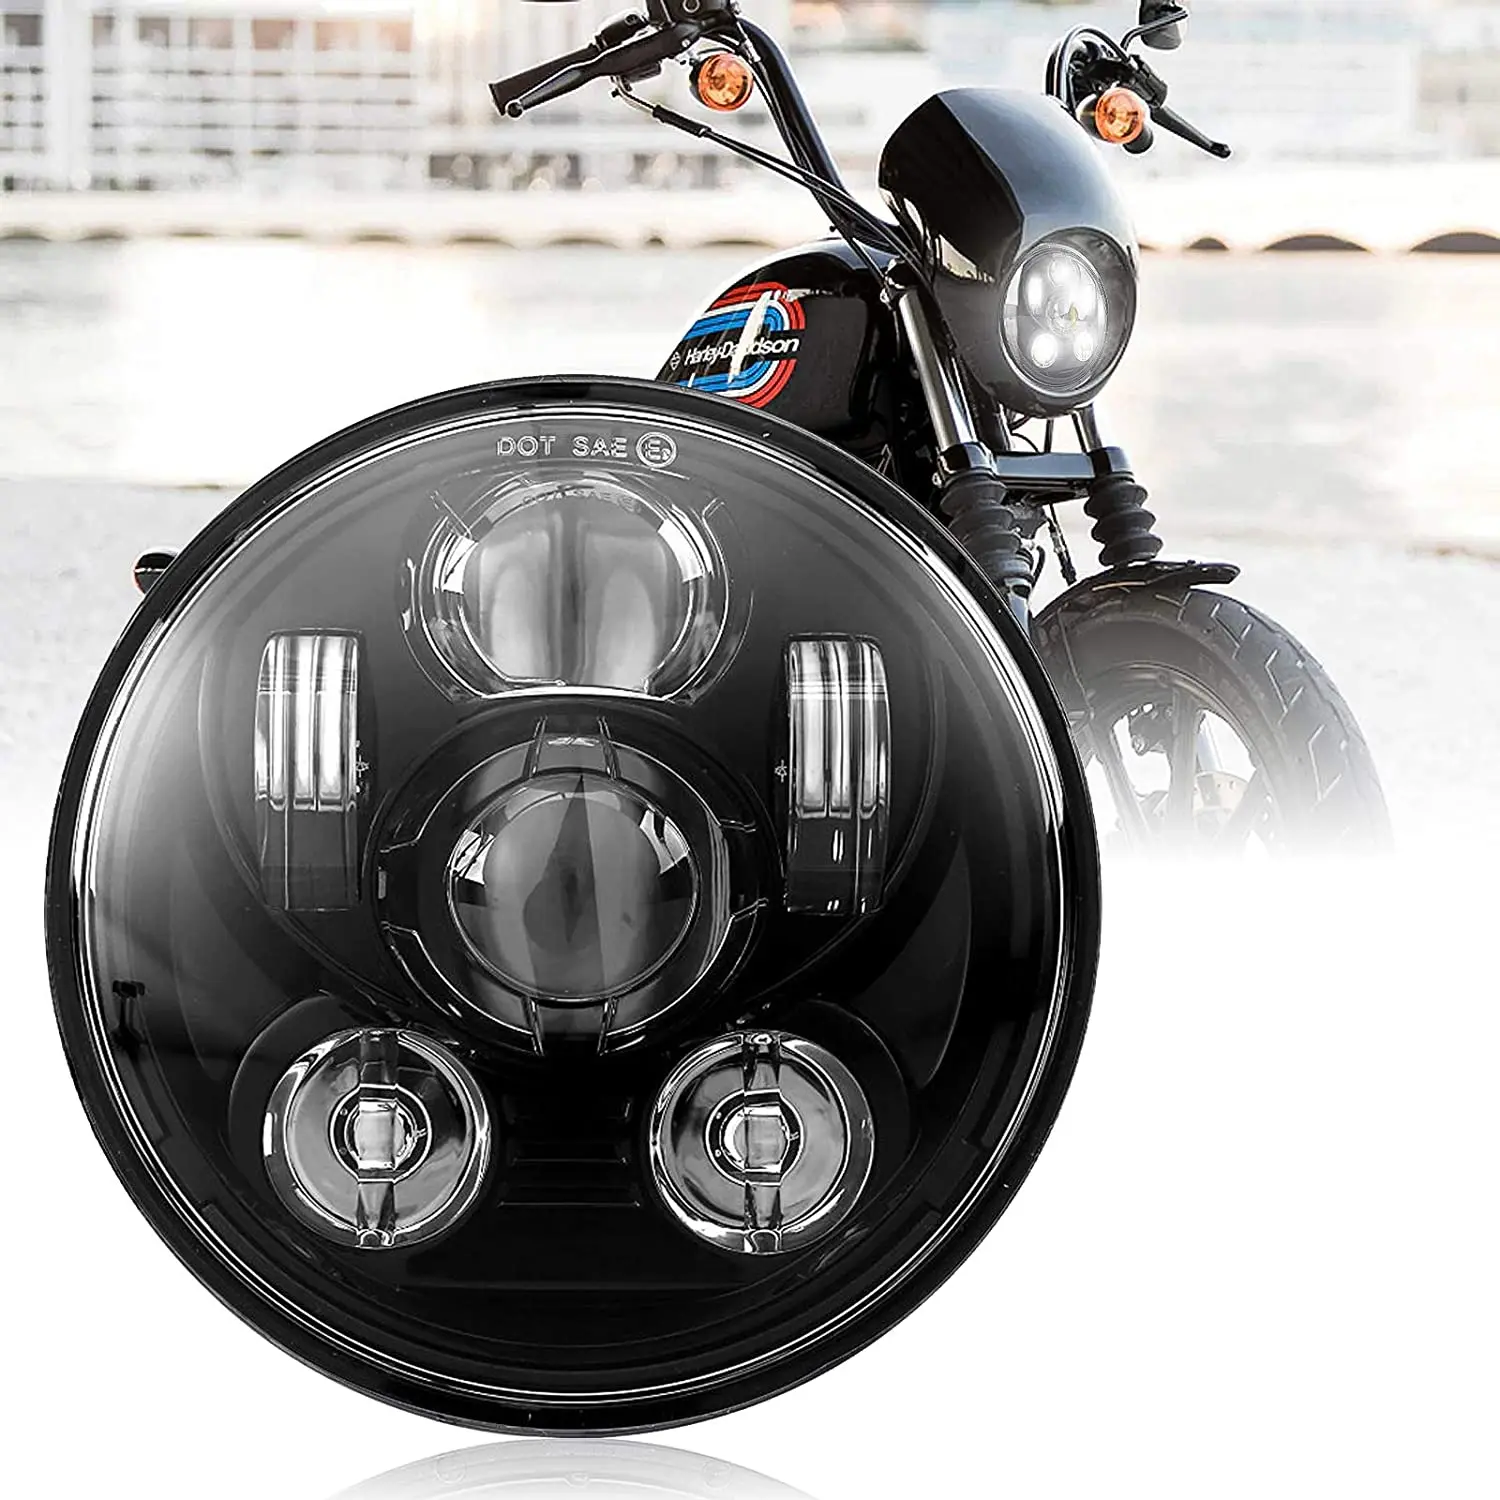 Black 1PCS 5.75 Inch Led Headlight 80W DOT Approved for Harley 5-3/4 Inch Round Headlight with DRL Low Beam and High Beam for Harley Dyna Sportster Iron 883 Street Rod Softail Motorcycle 